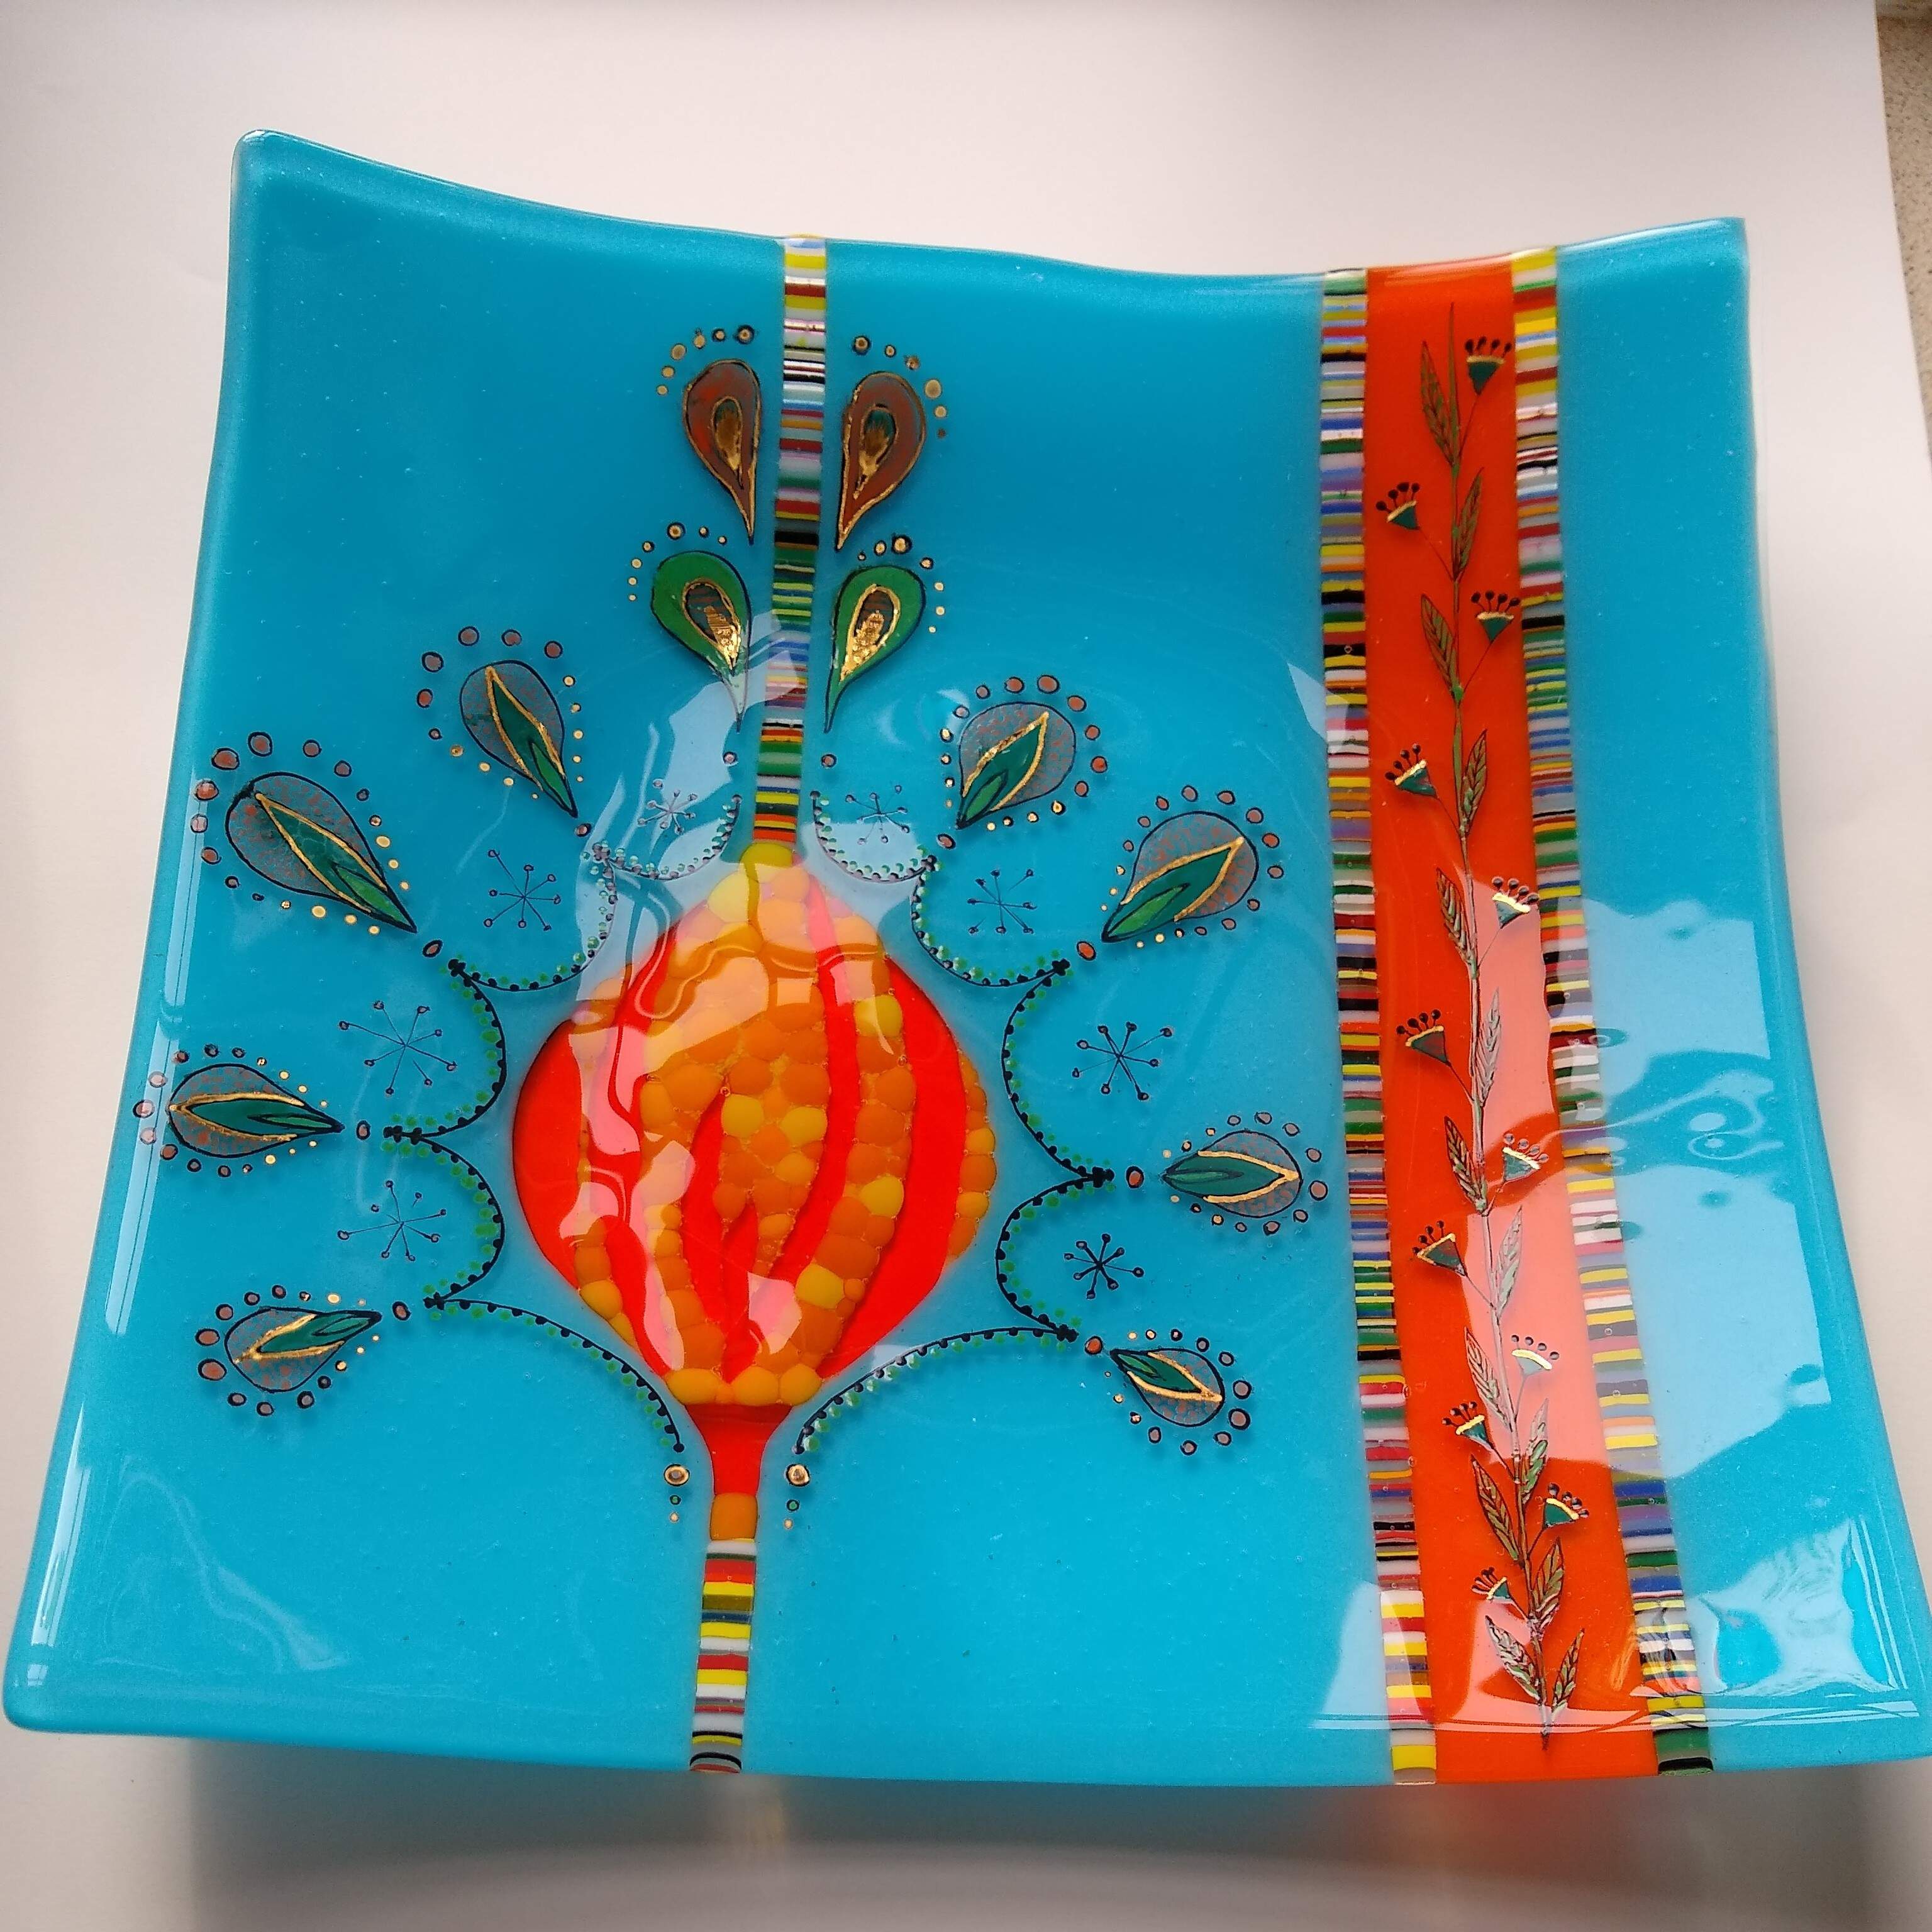 Glass and gilded dish made by Maureen Charles